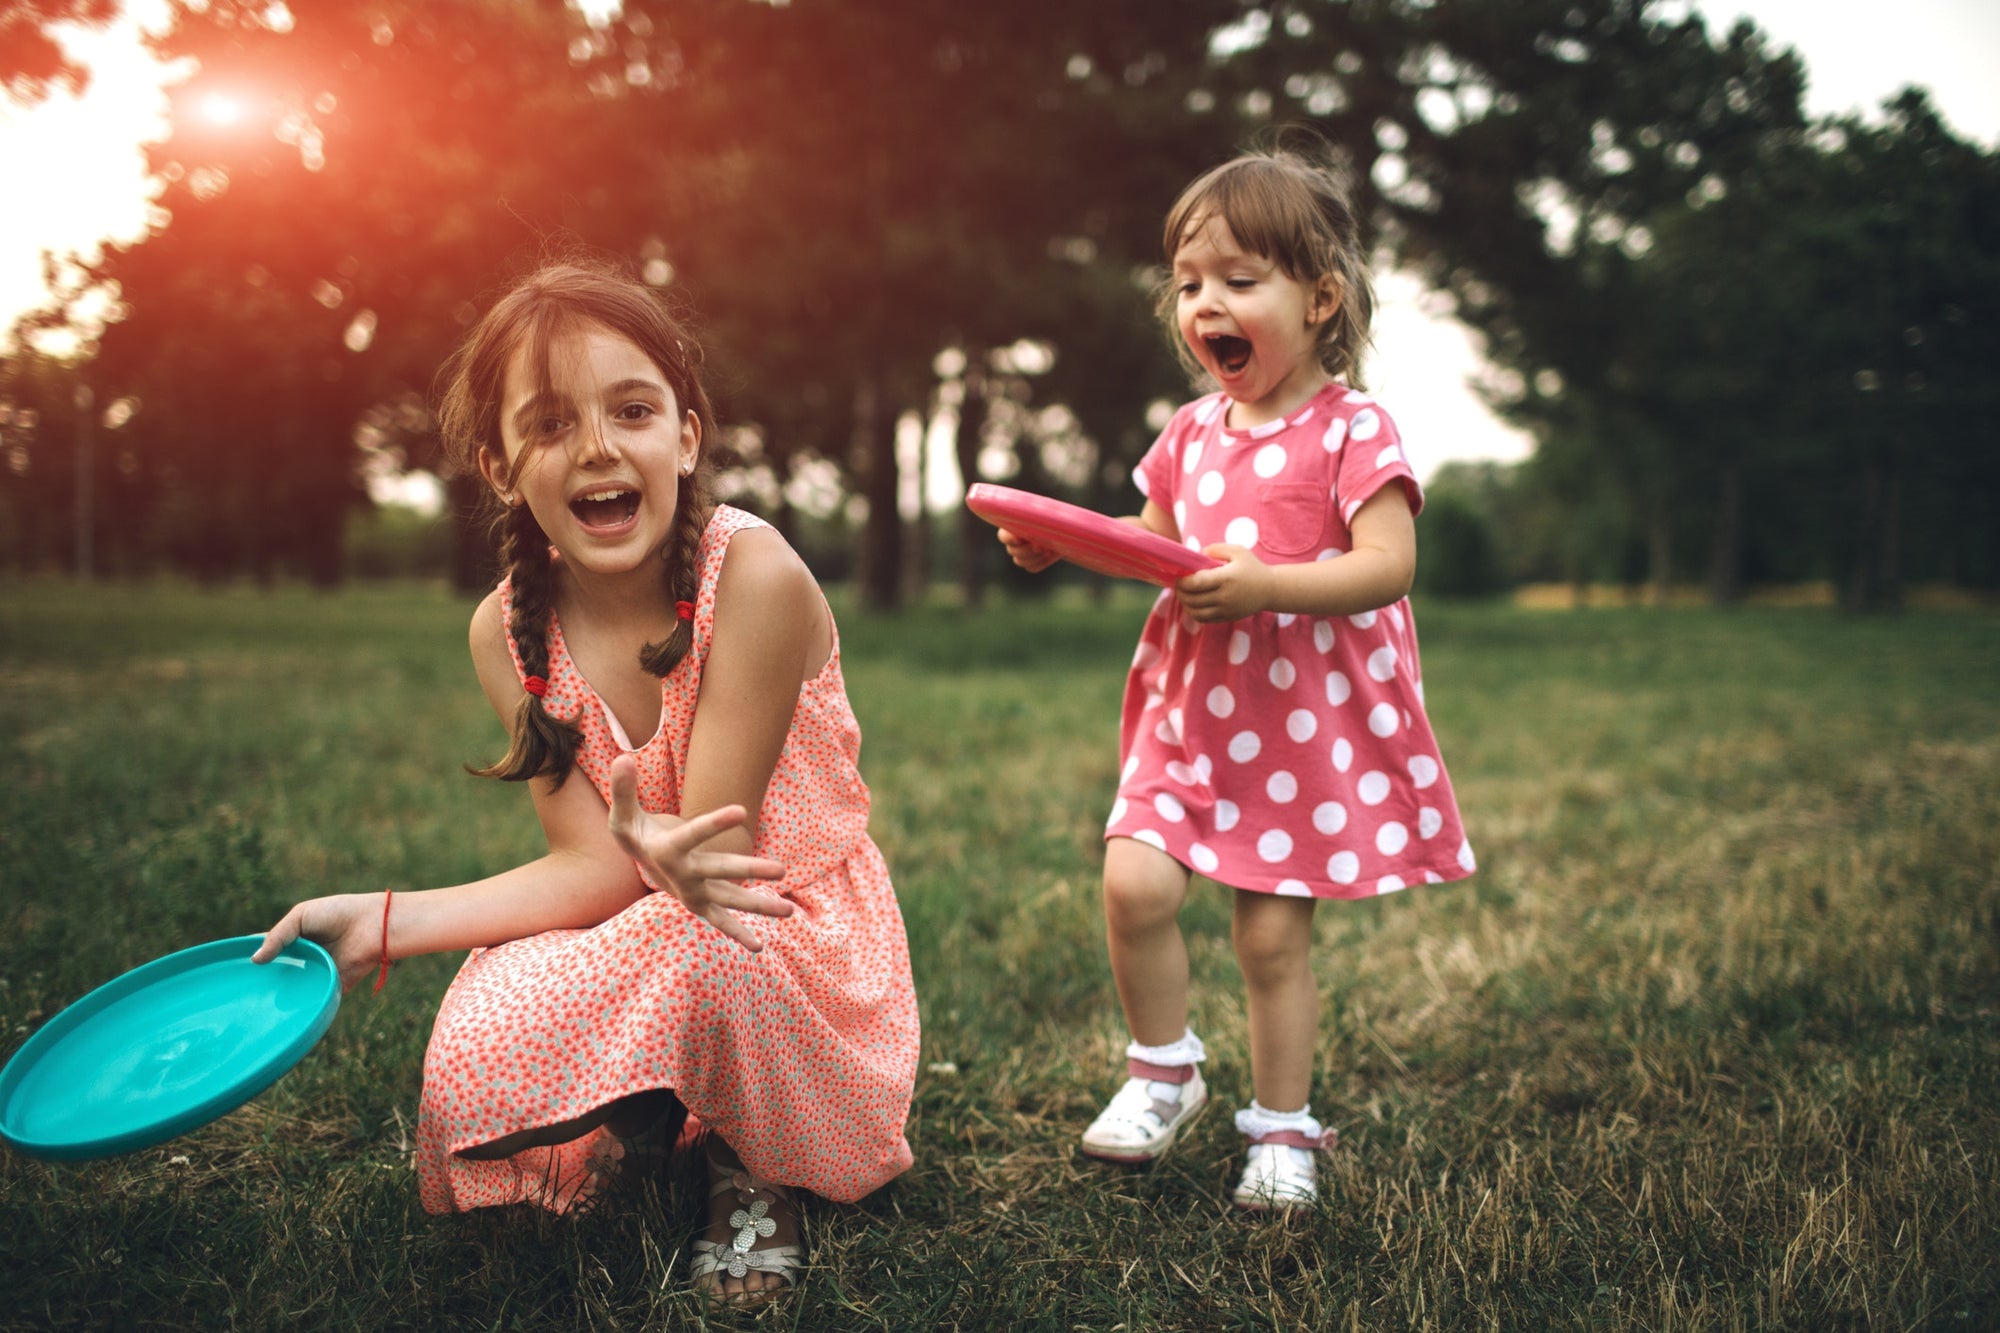 Little Girls Playing With Frisbee Toy Outdoor In Nature